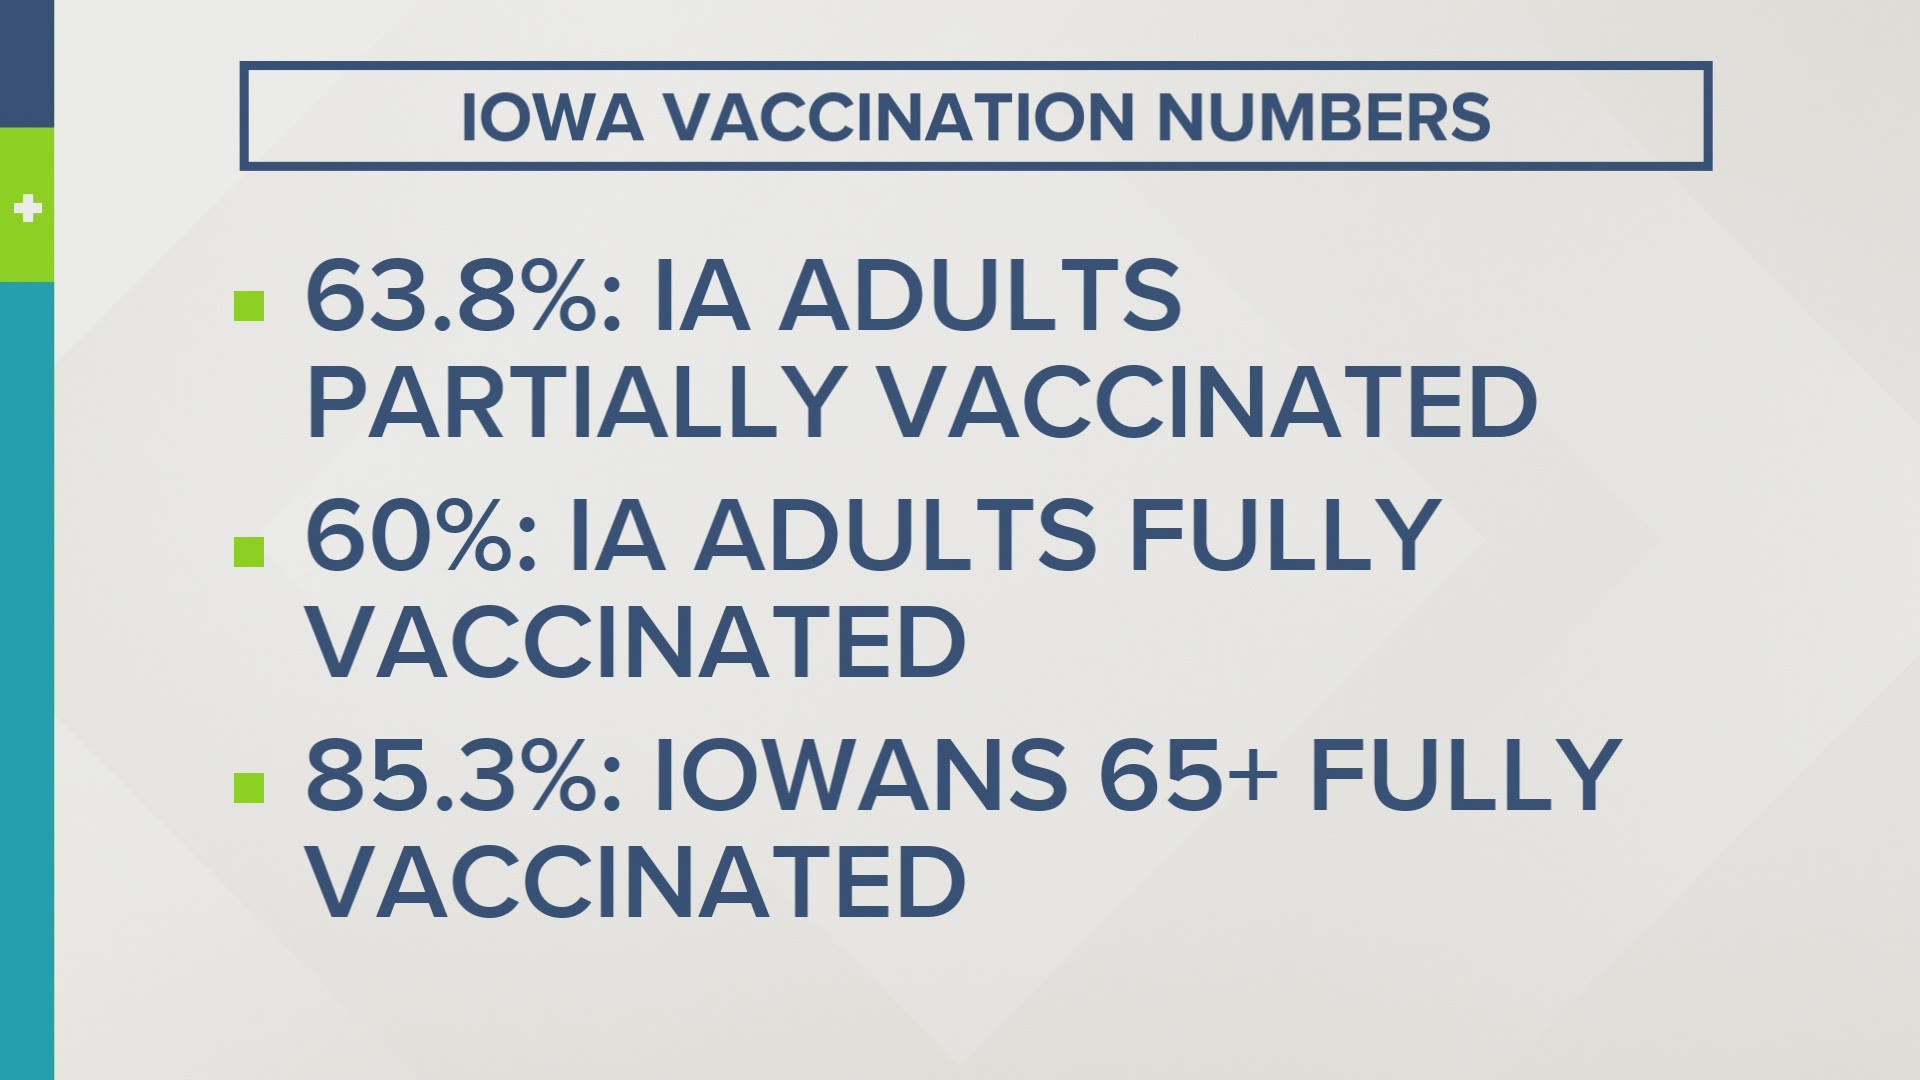 In Polk and Story counties, about 50% of the population is vaccinated. But vaccination rates have dropped significantly in the last few weeks.